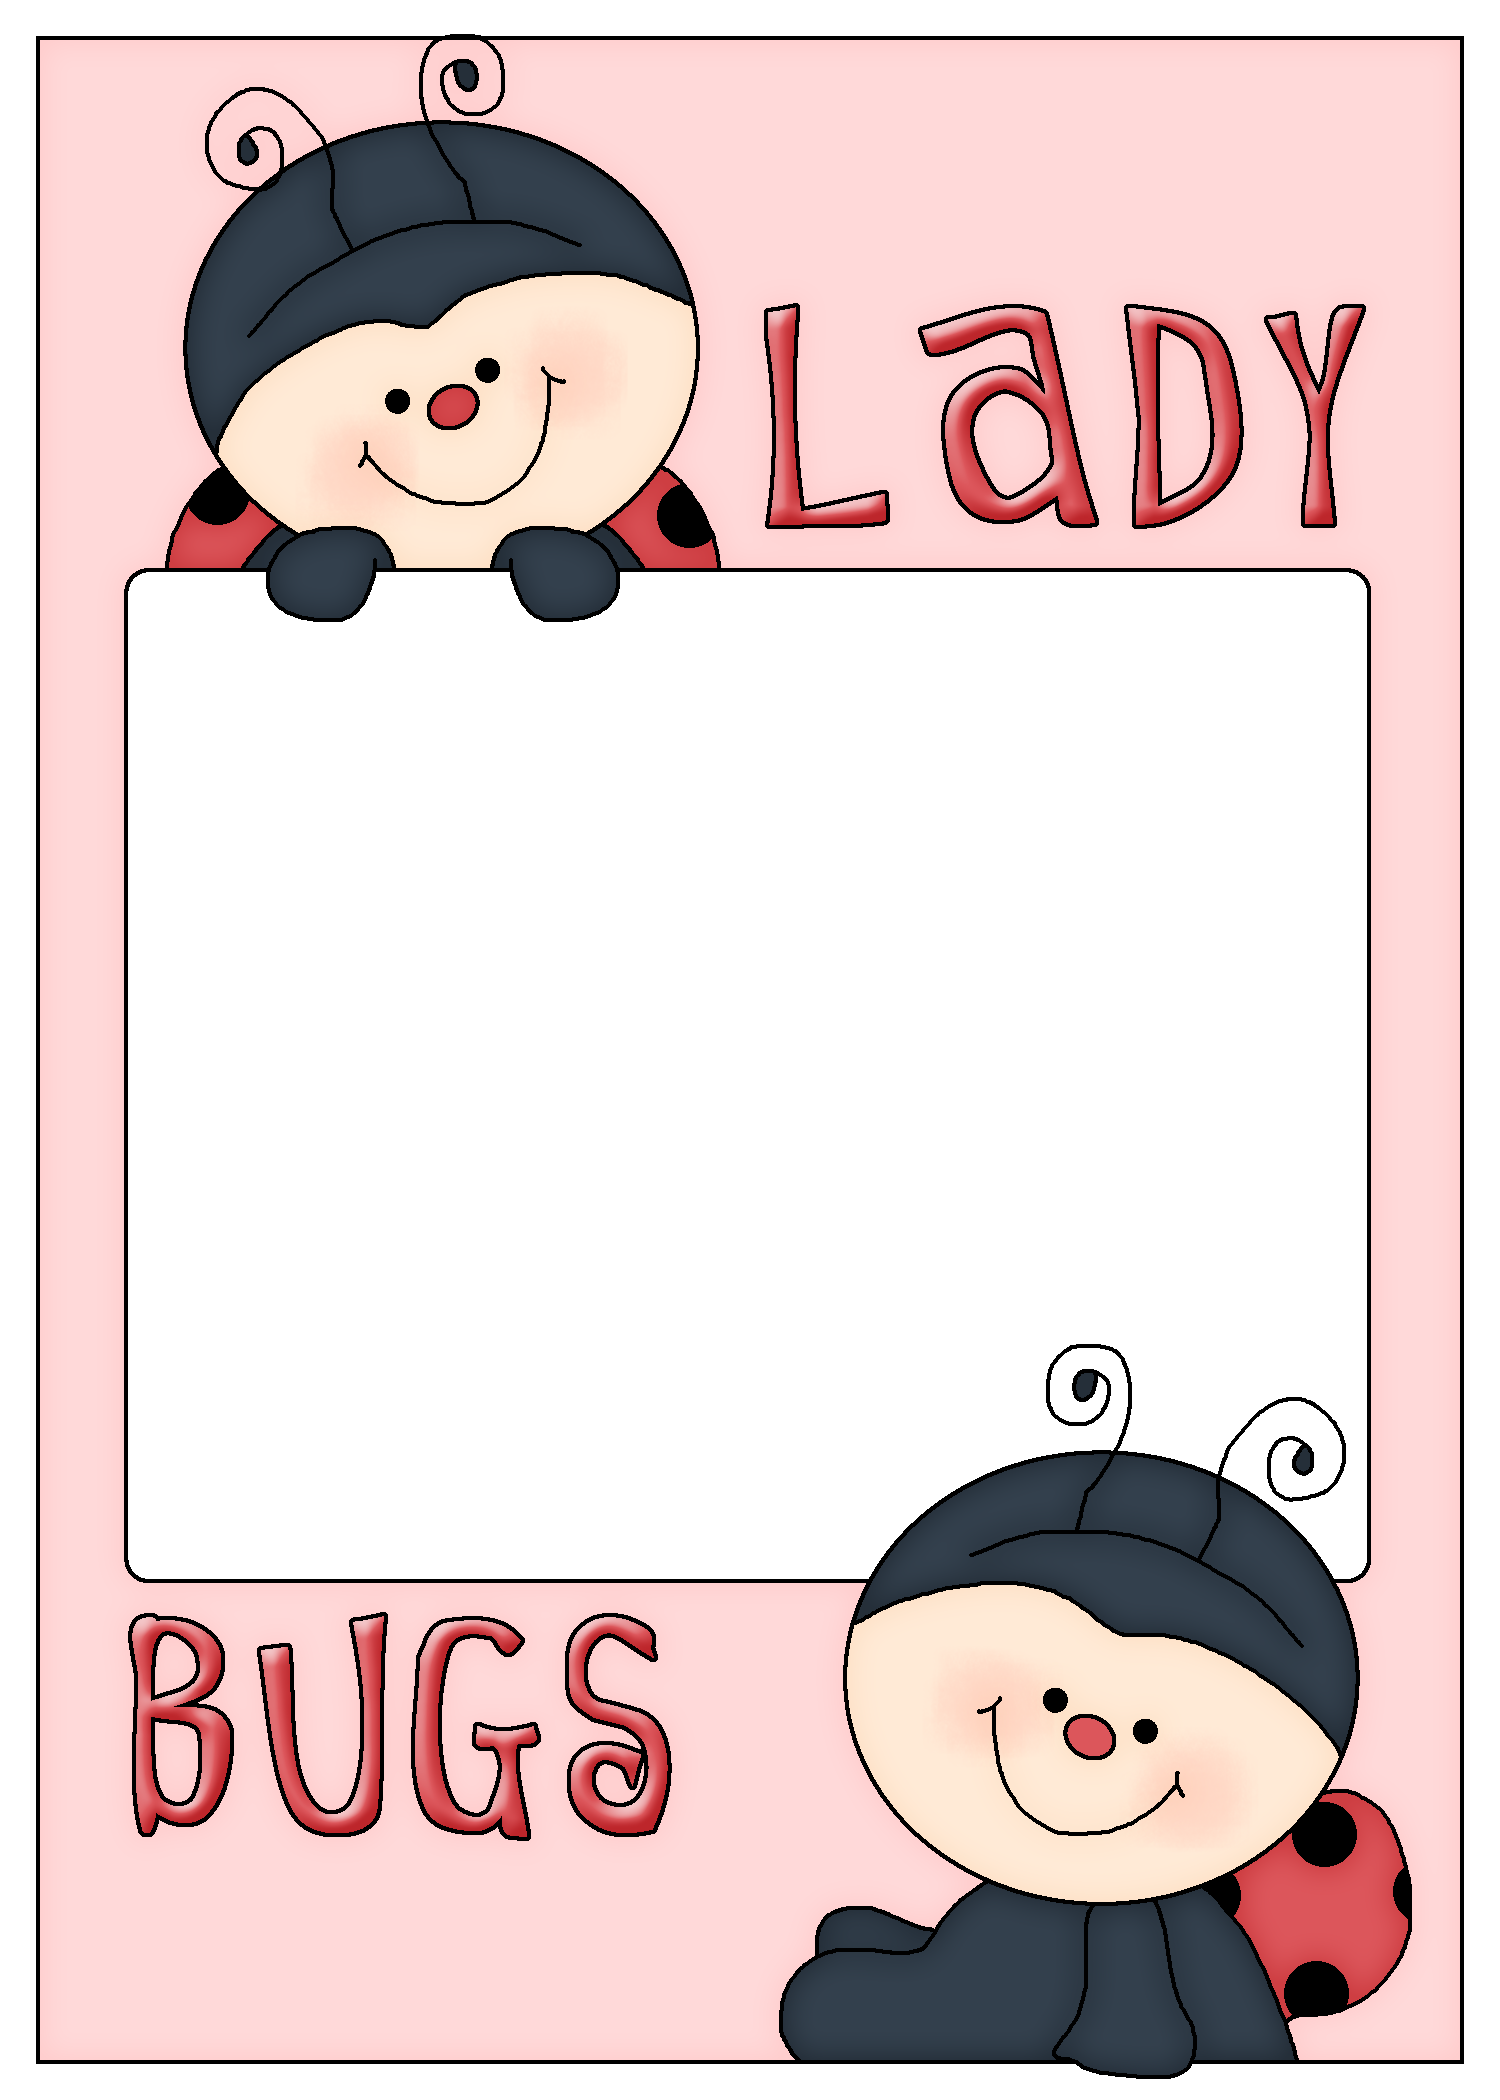 insects clipart kawaii